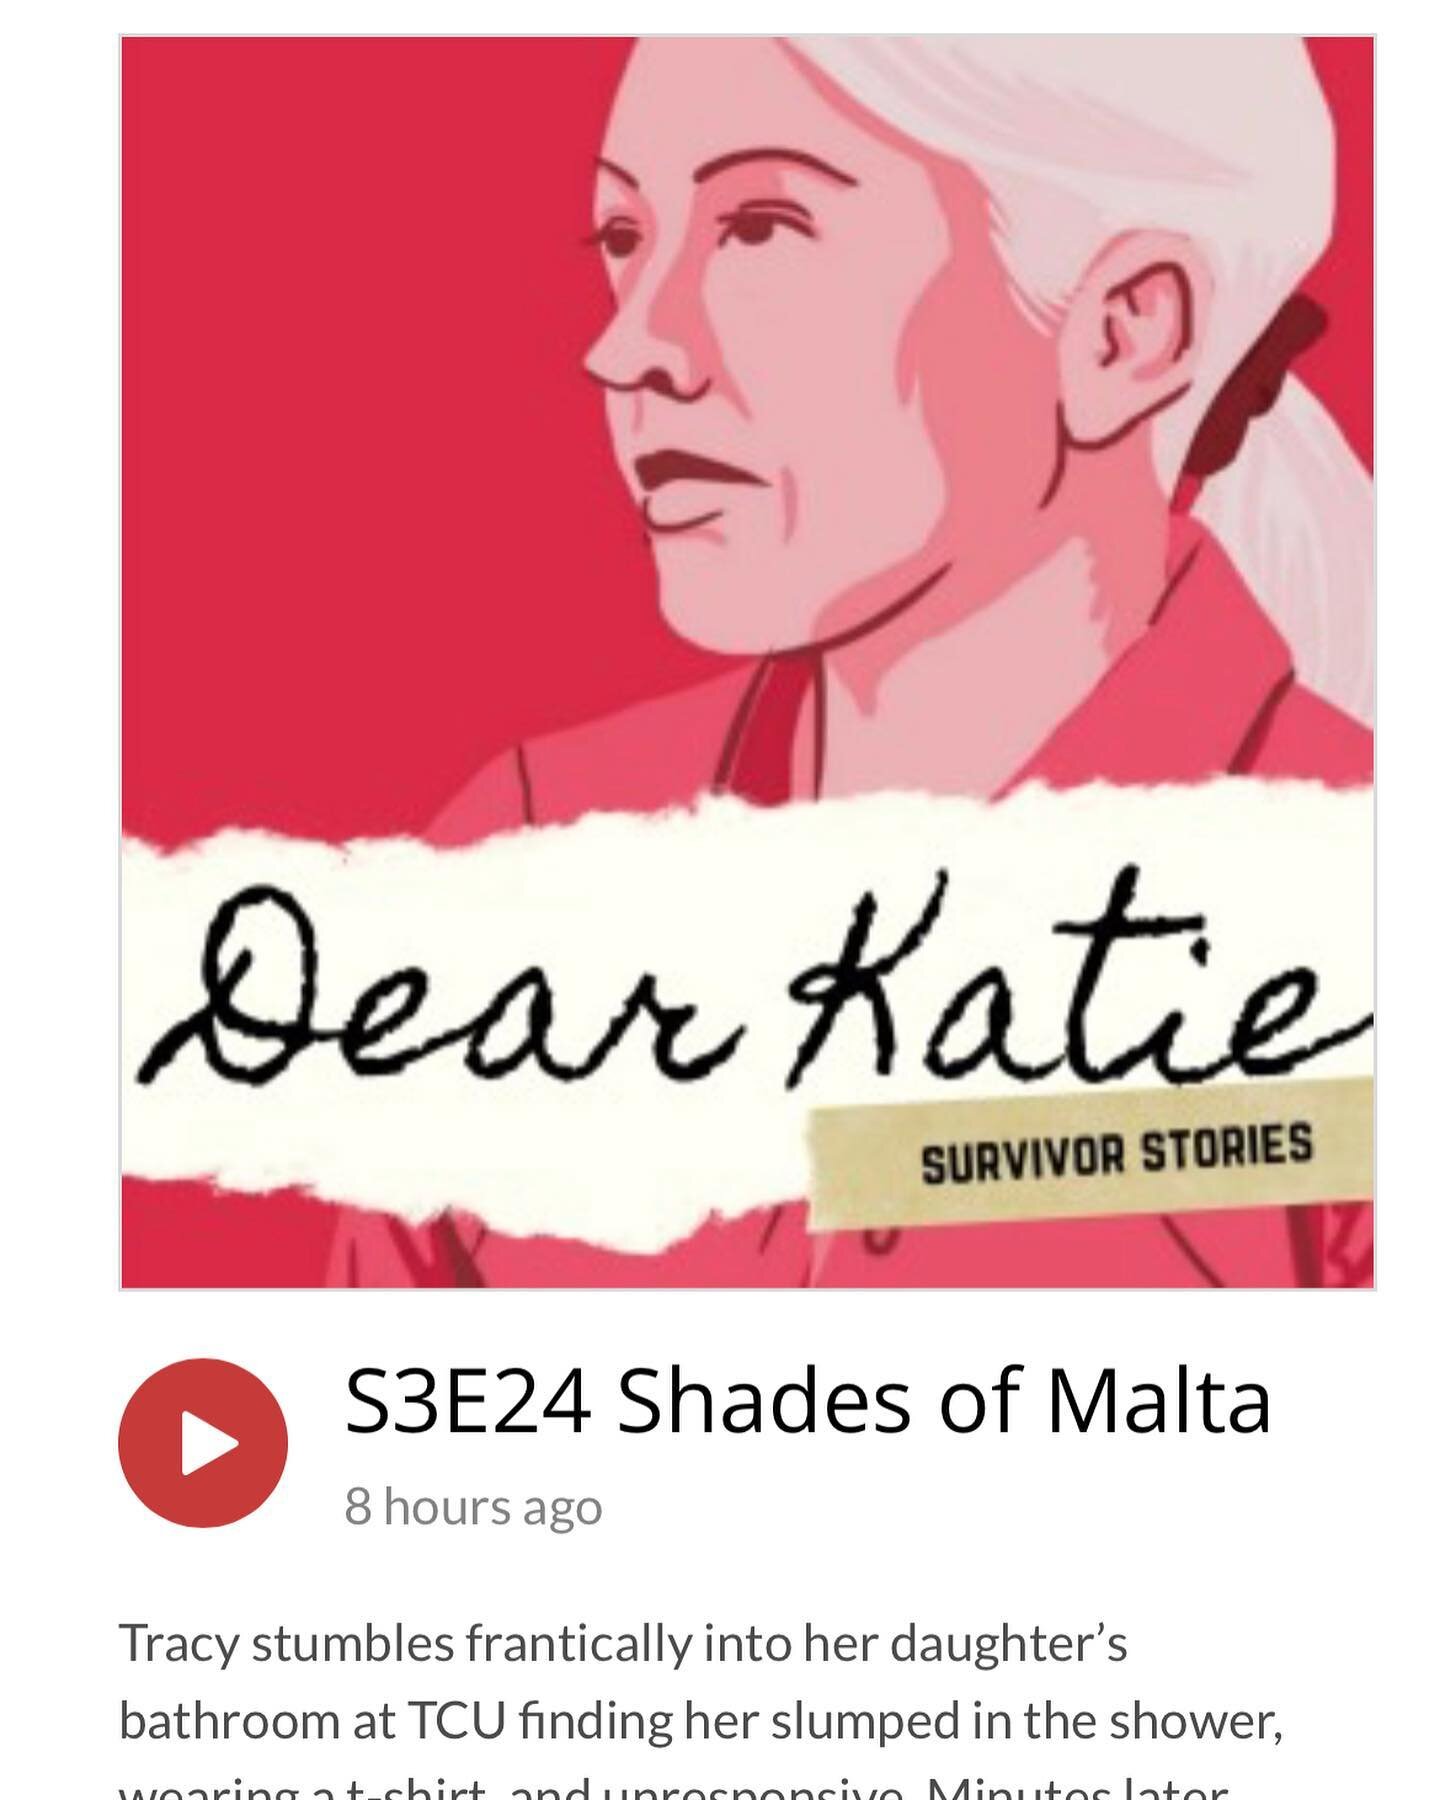 Our latest podcast is available to listen and share! I was delighted to be asked to be a guest on &ldquo;Dear Katie&rdquo;, podcast by @katiekoestner Even more delighted to be able to talk about Molly Jane. Why &ldquo;Shades of Malta&rdquo;? Molly an